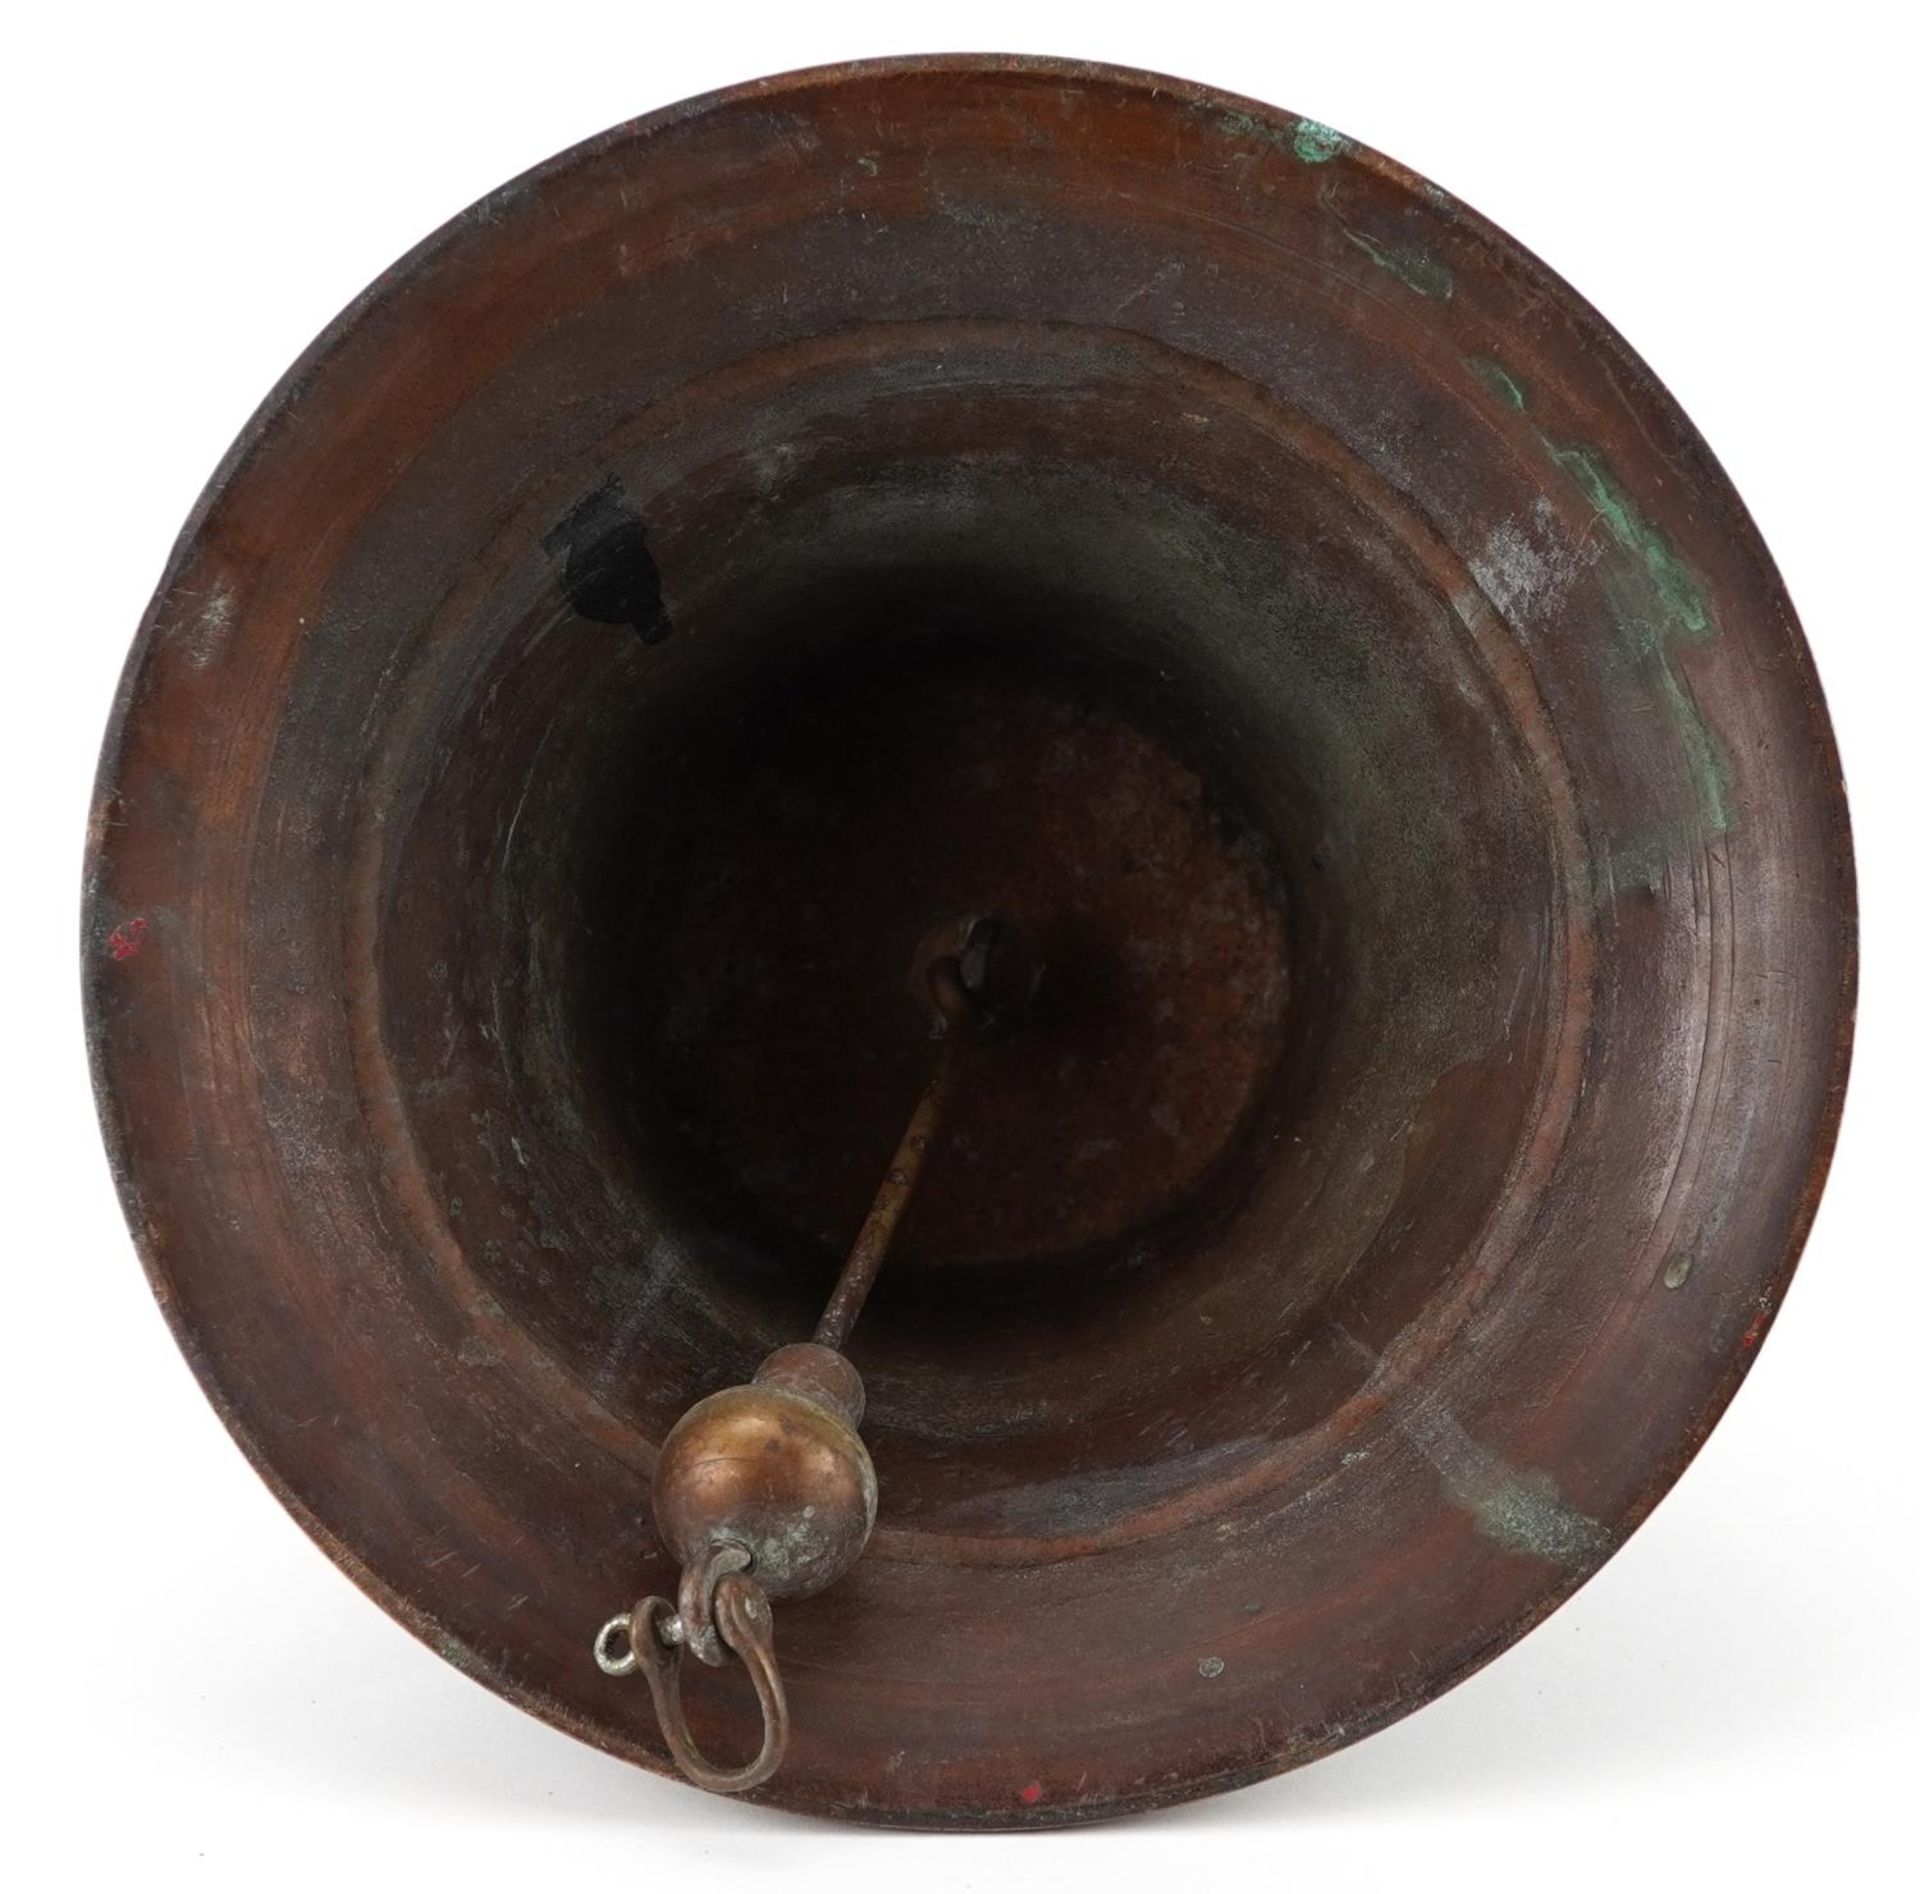 Antique patinated bronze ship's bell, 20.5cm high - Image 3 of 3